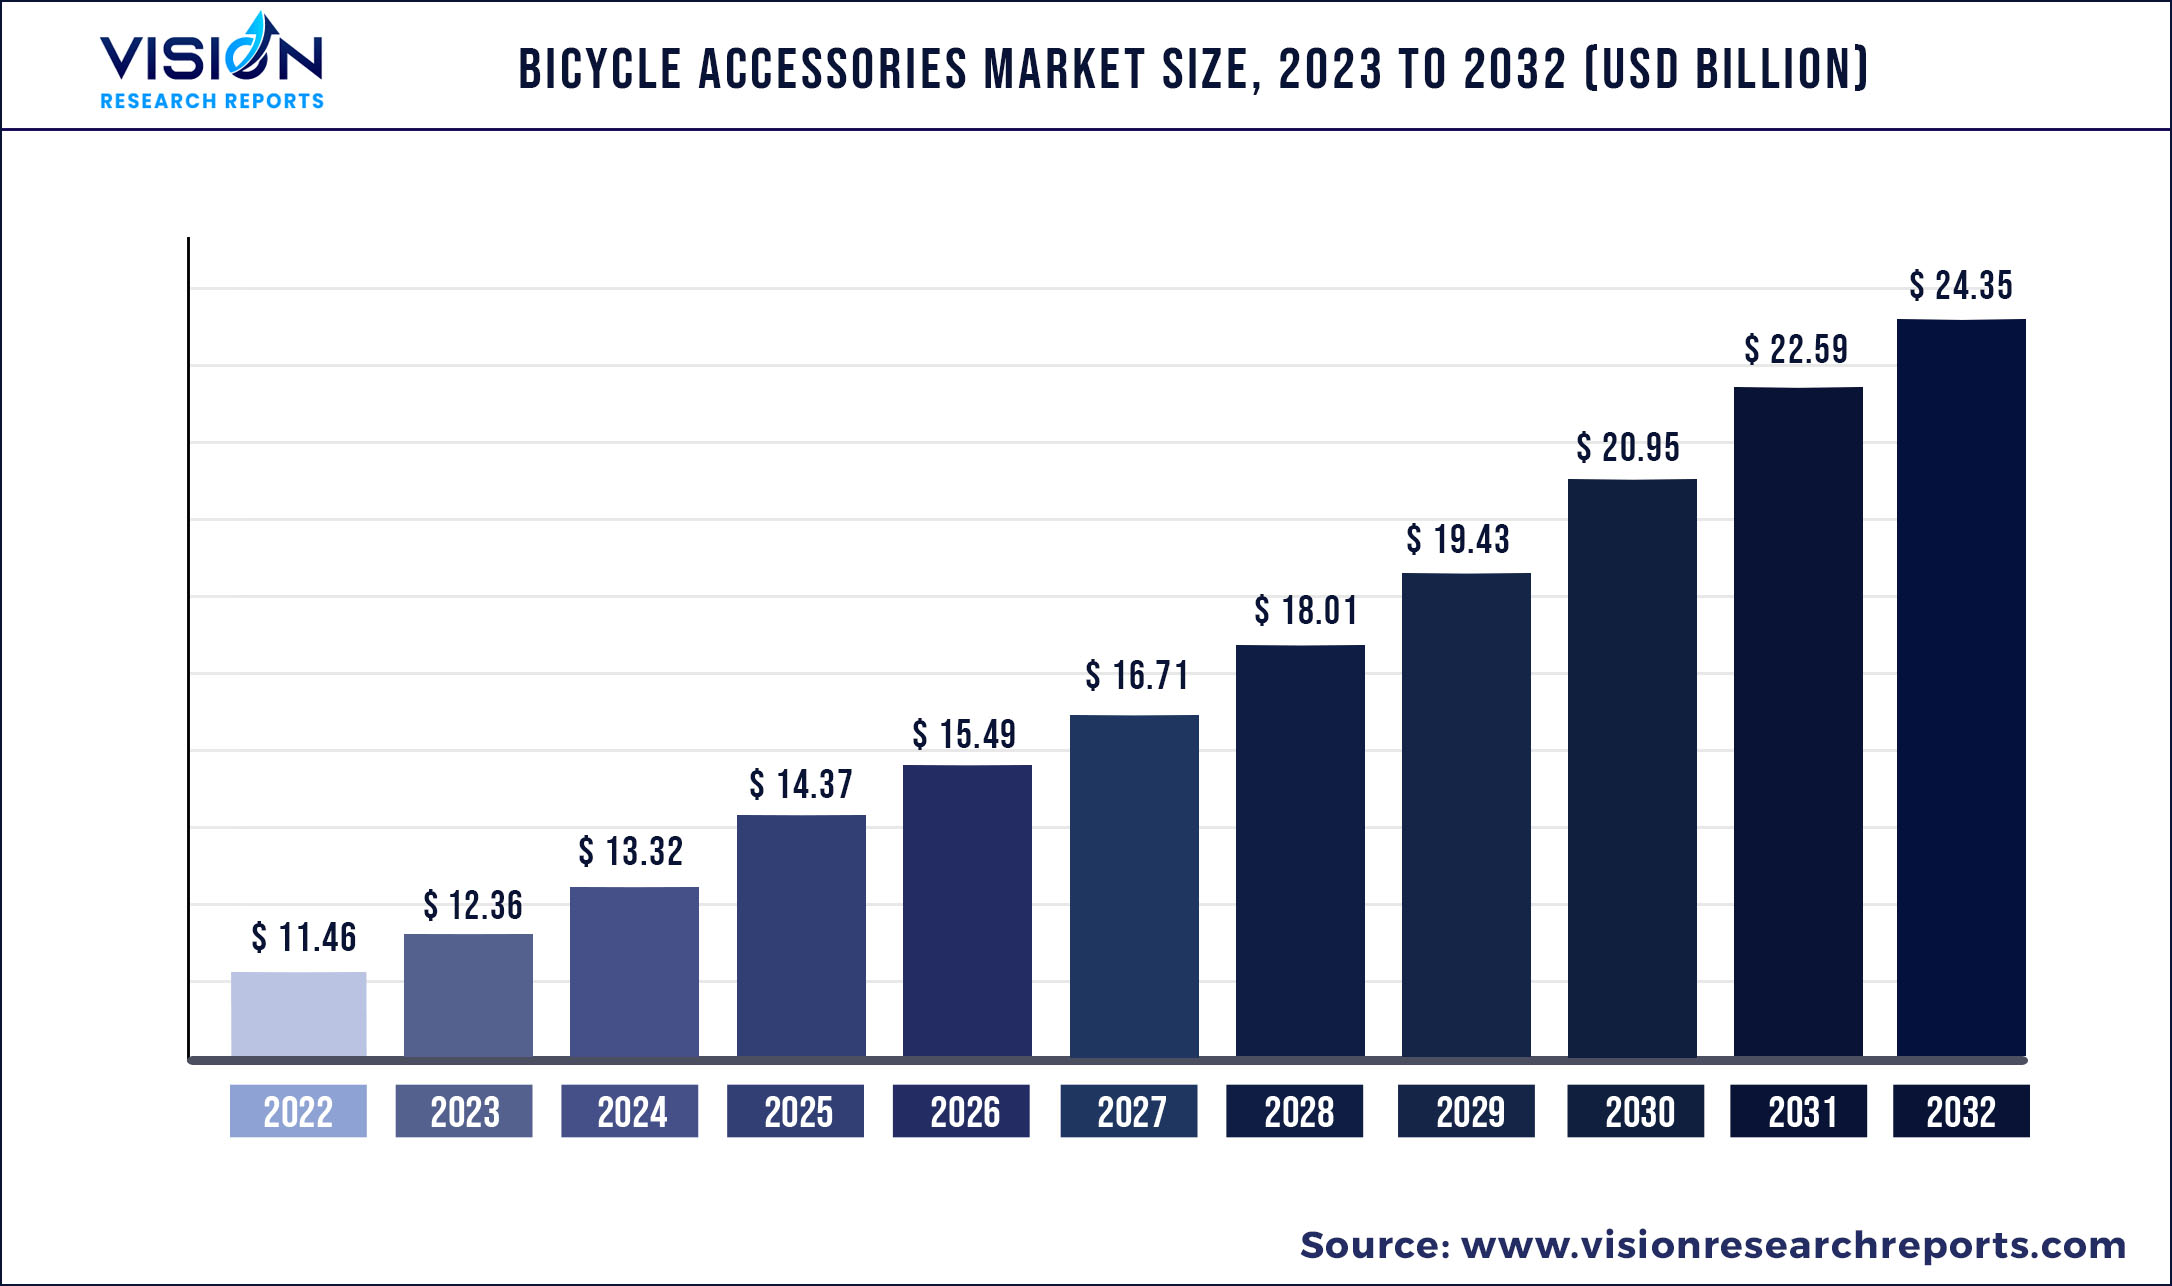 Bicycle Accessories Market Size 2023 to 2032